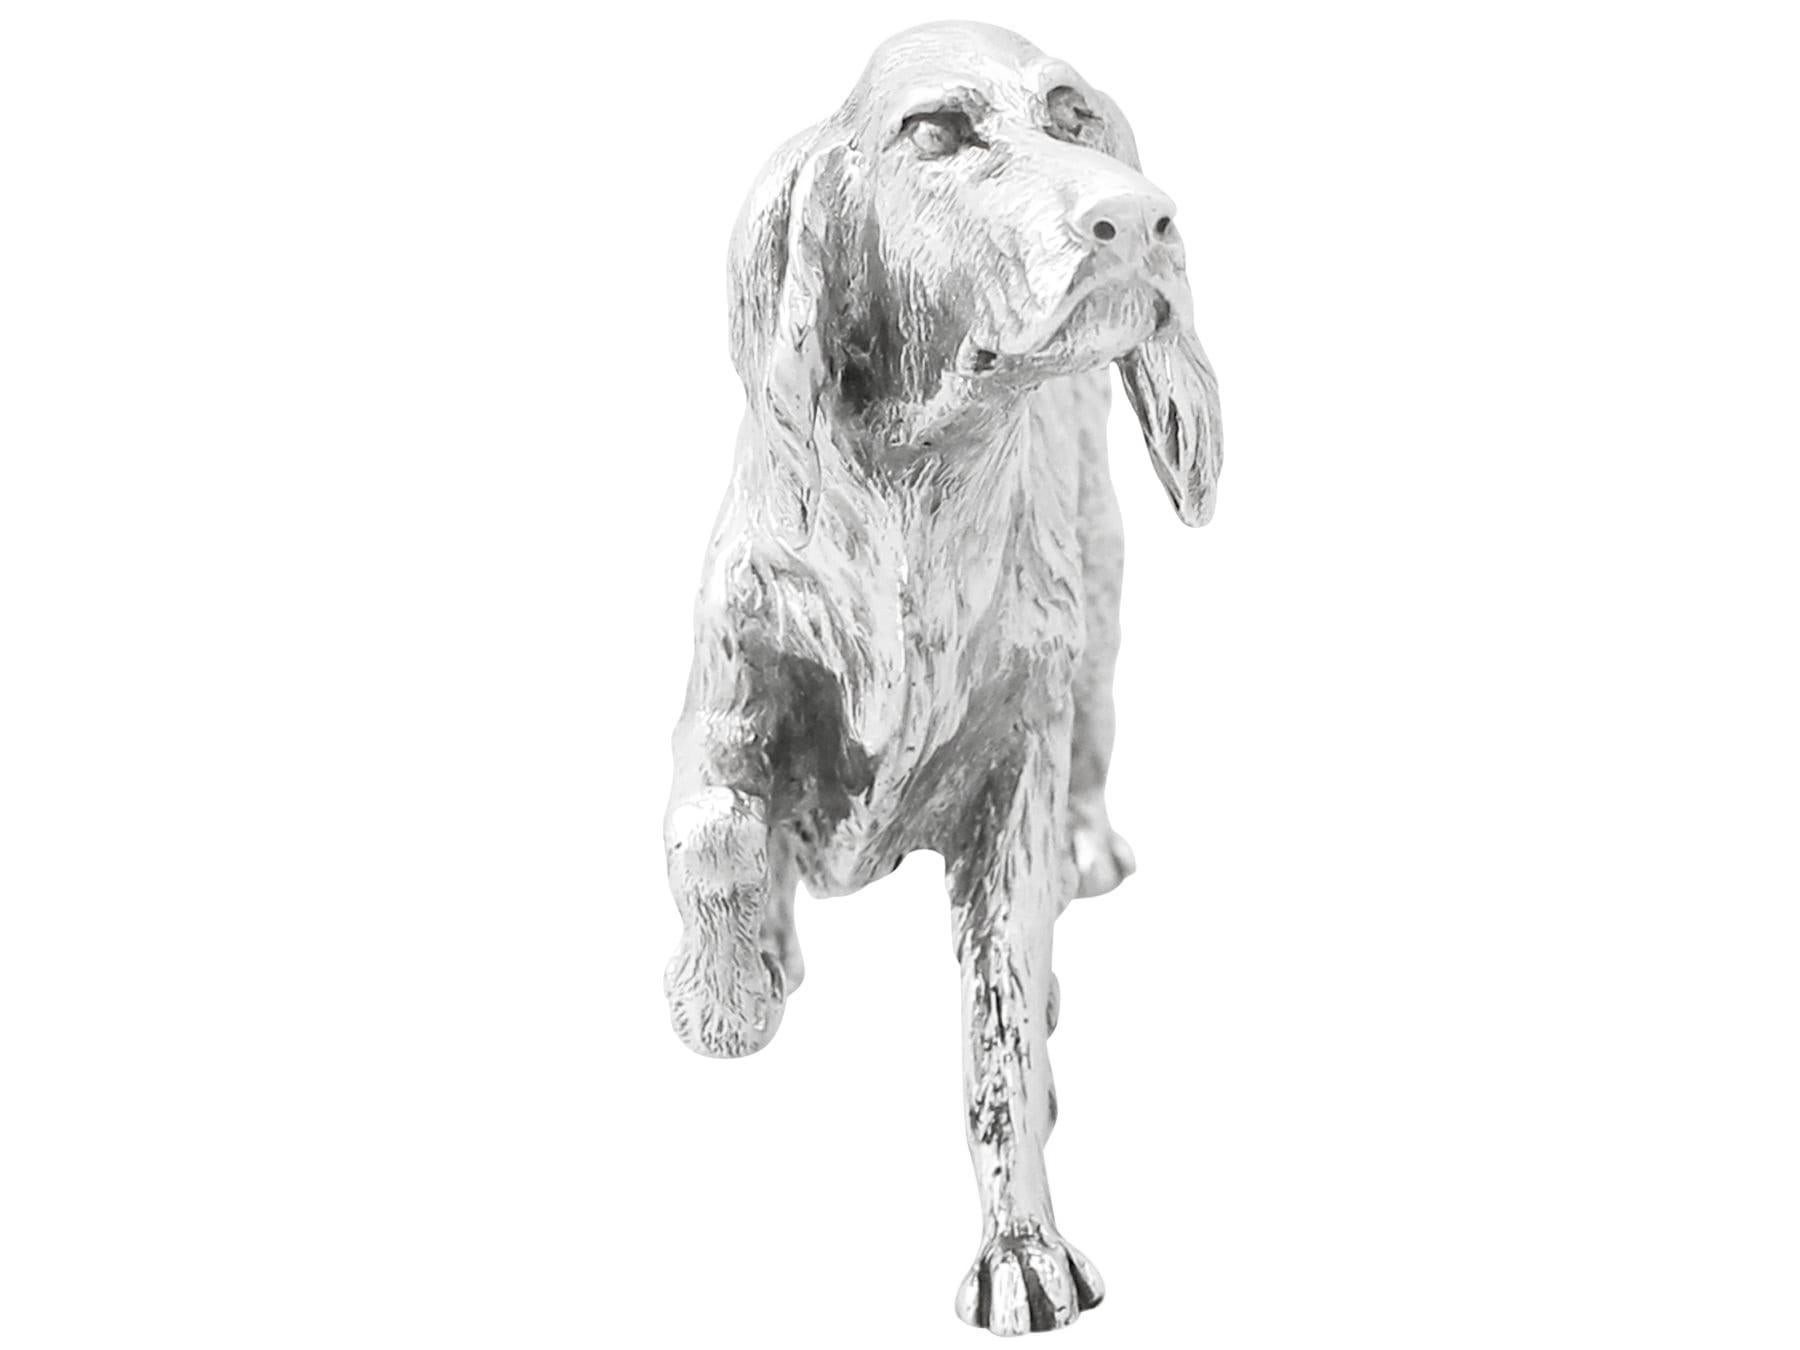 A fine contemporary cast English sterling silver model of a setter; part of our animal related silverware collection

This fine contemporary cast sterling silver ornament has been realistically modelled in the form of a Irish setter.

This